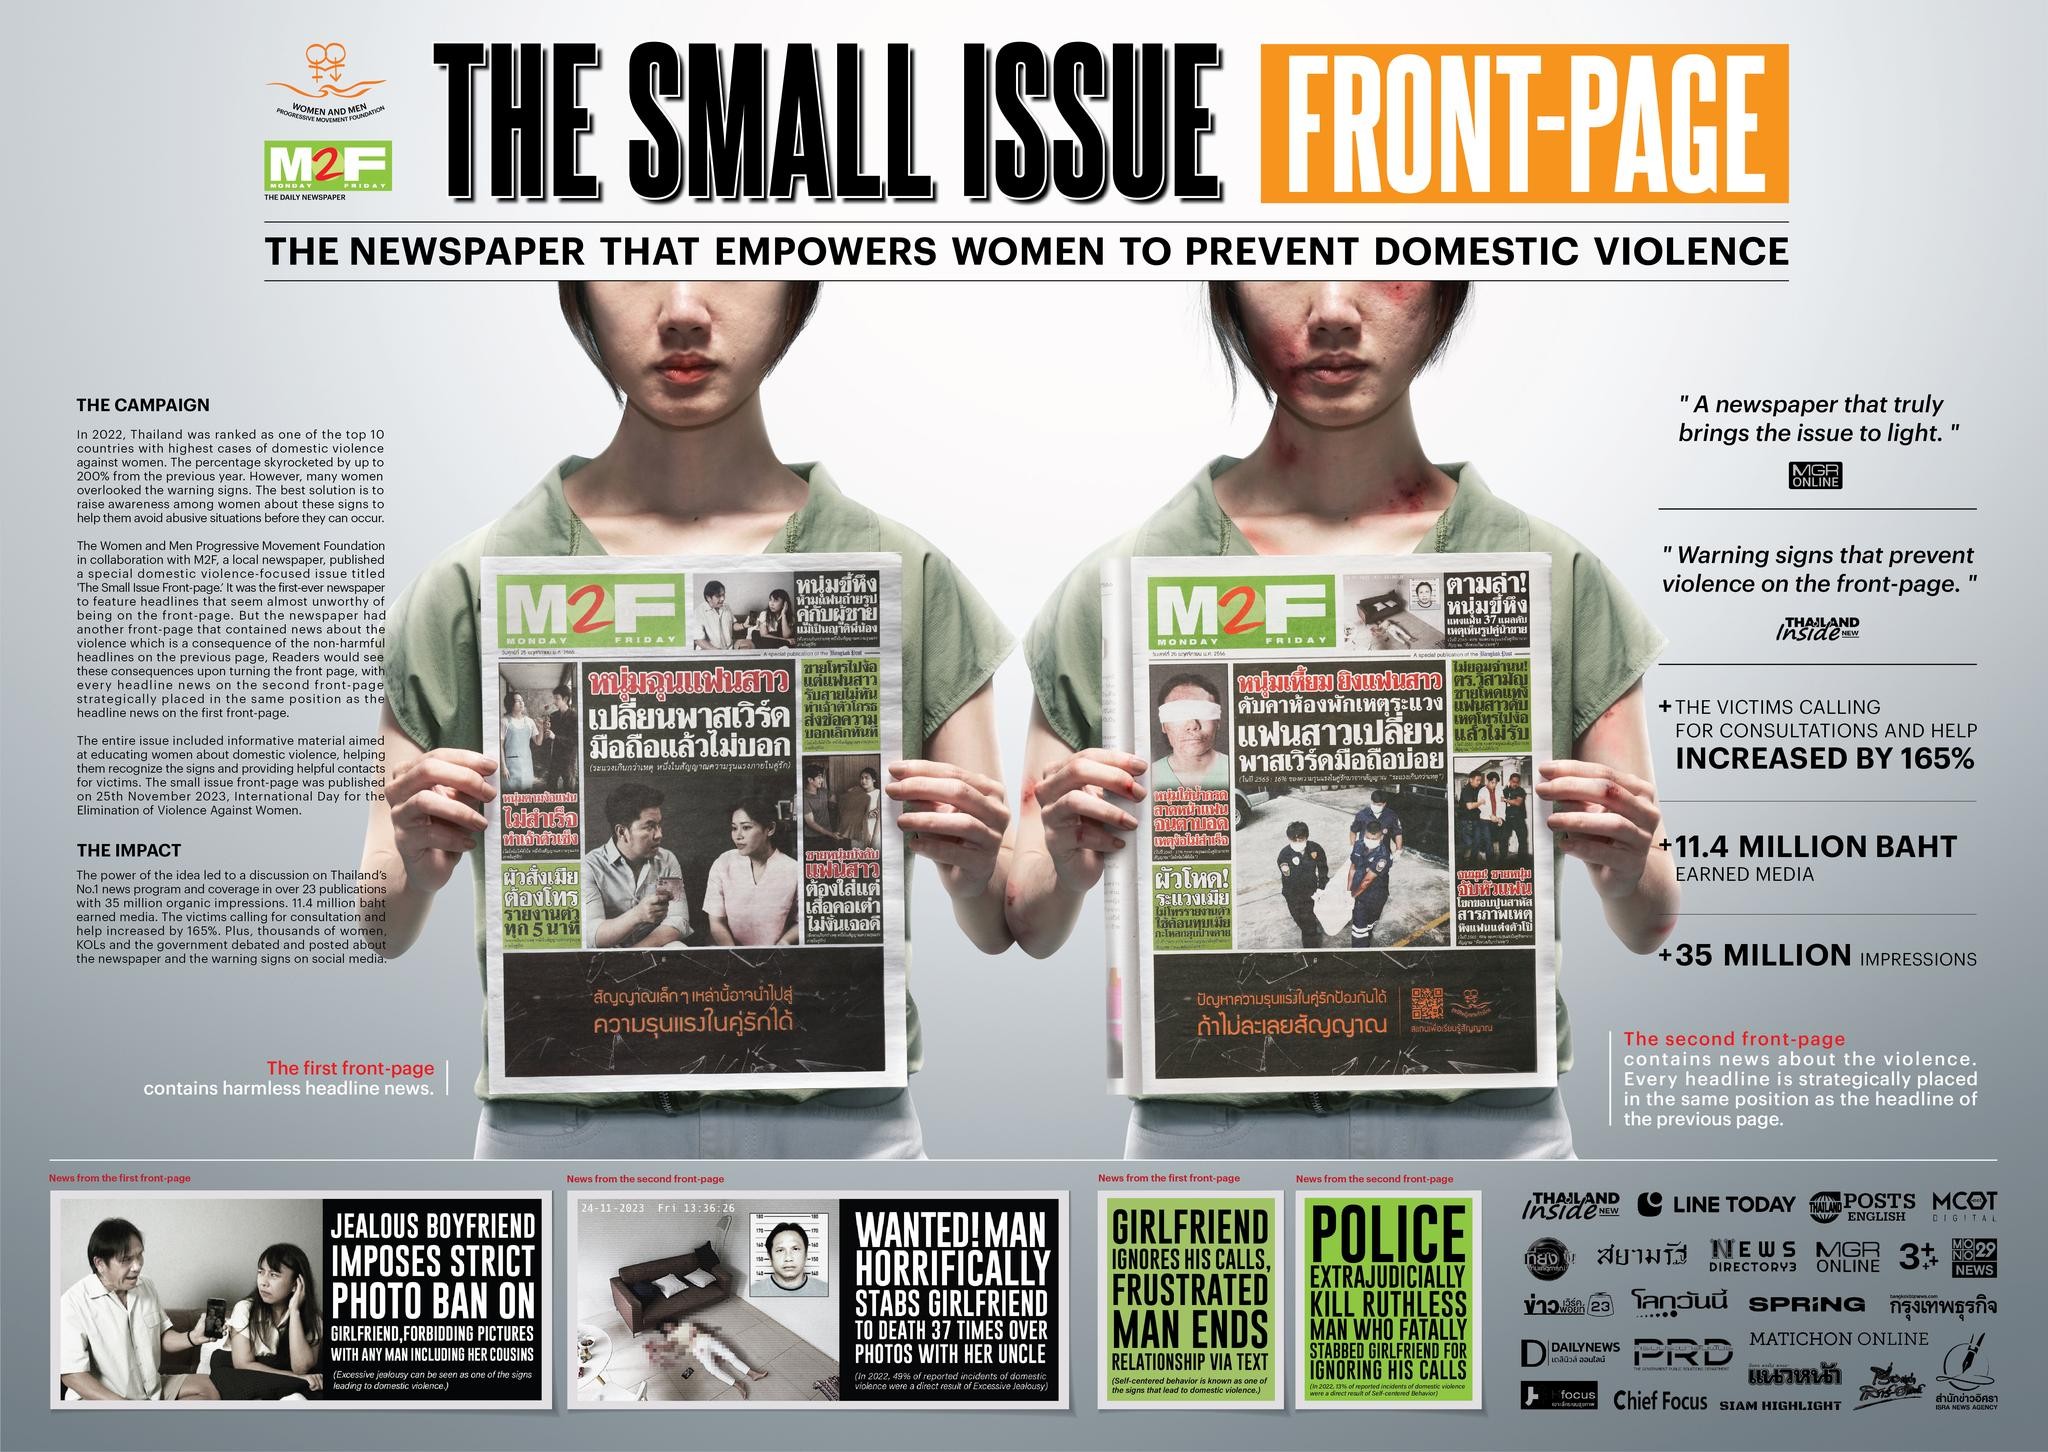 THE SMALL ISSUE FRONT-PAGE